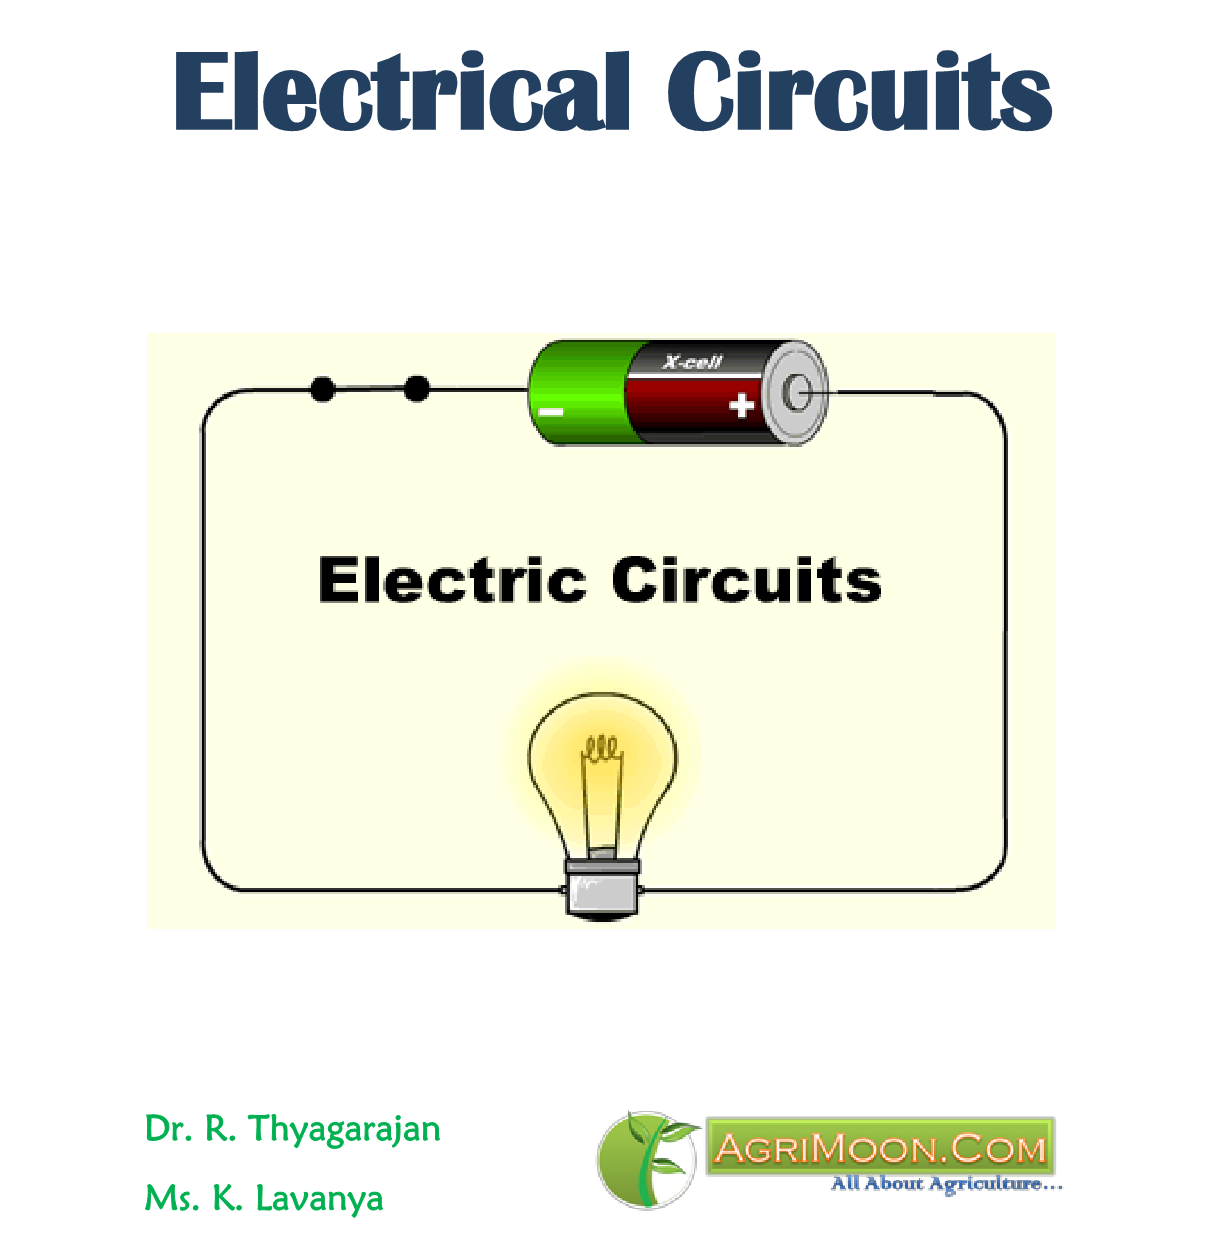 Electrical Circuits PDF Book Free Download - AgriMoon